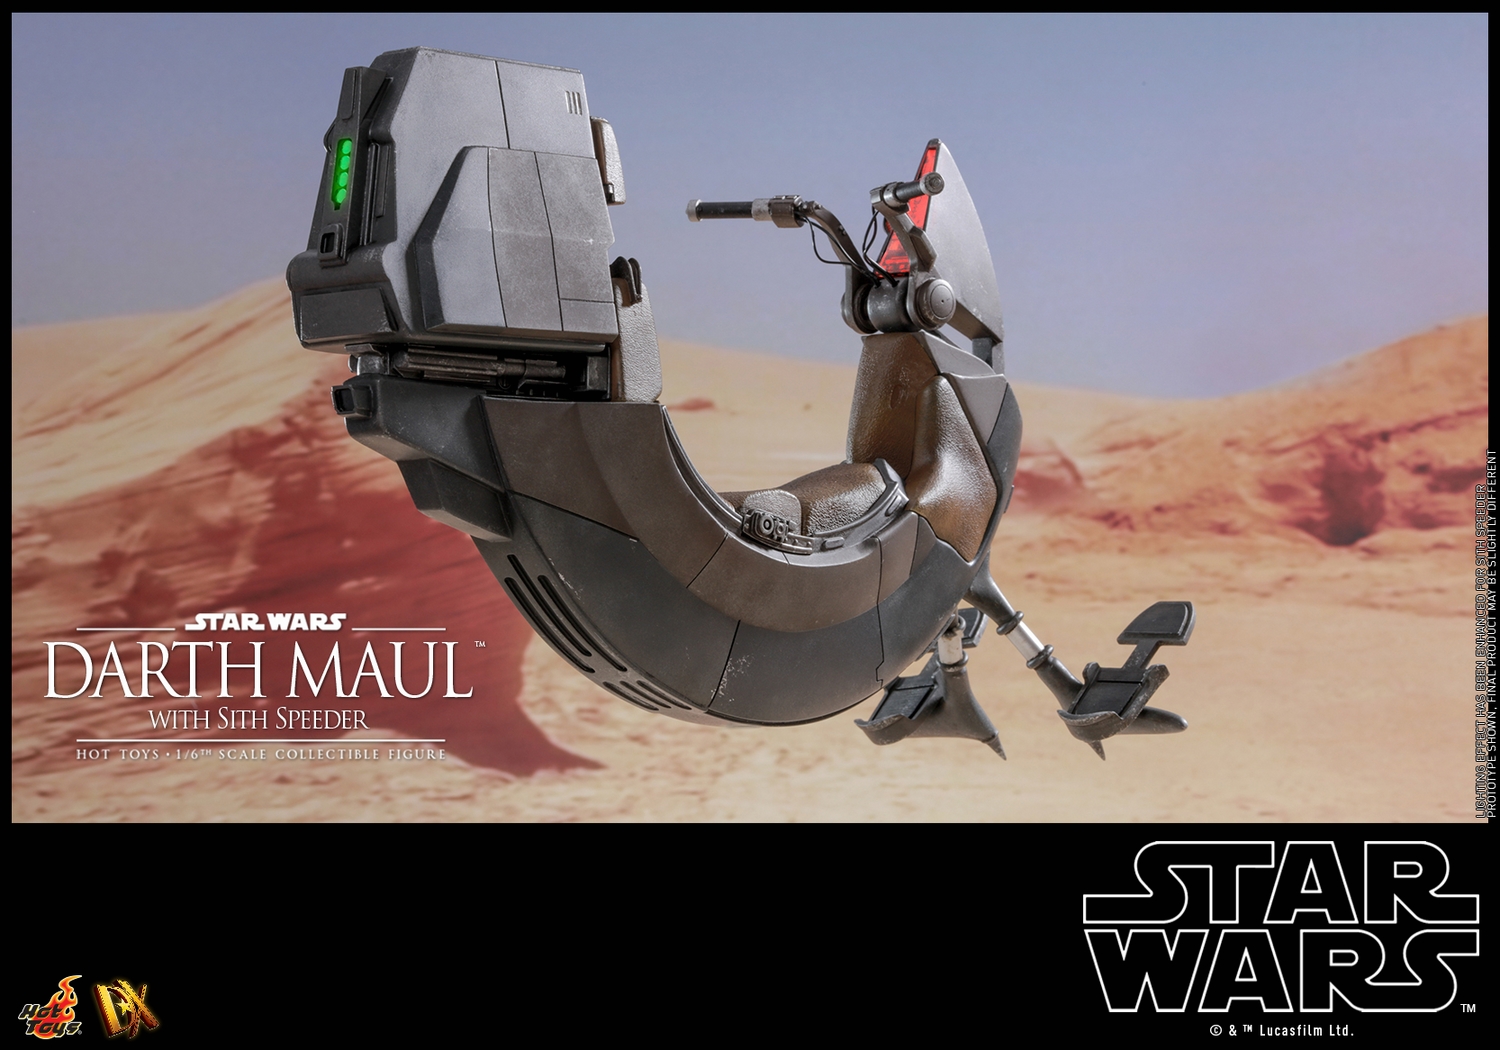 hot-toys-star-wars-1-6-darth-maul-with-sith-speeder-dx17-collectible-figure-027.jpg